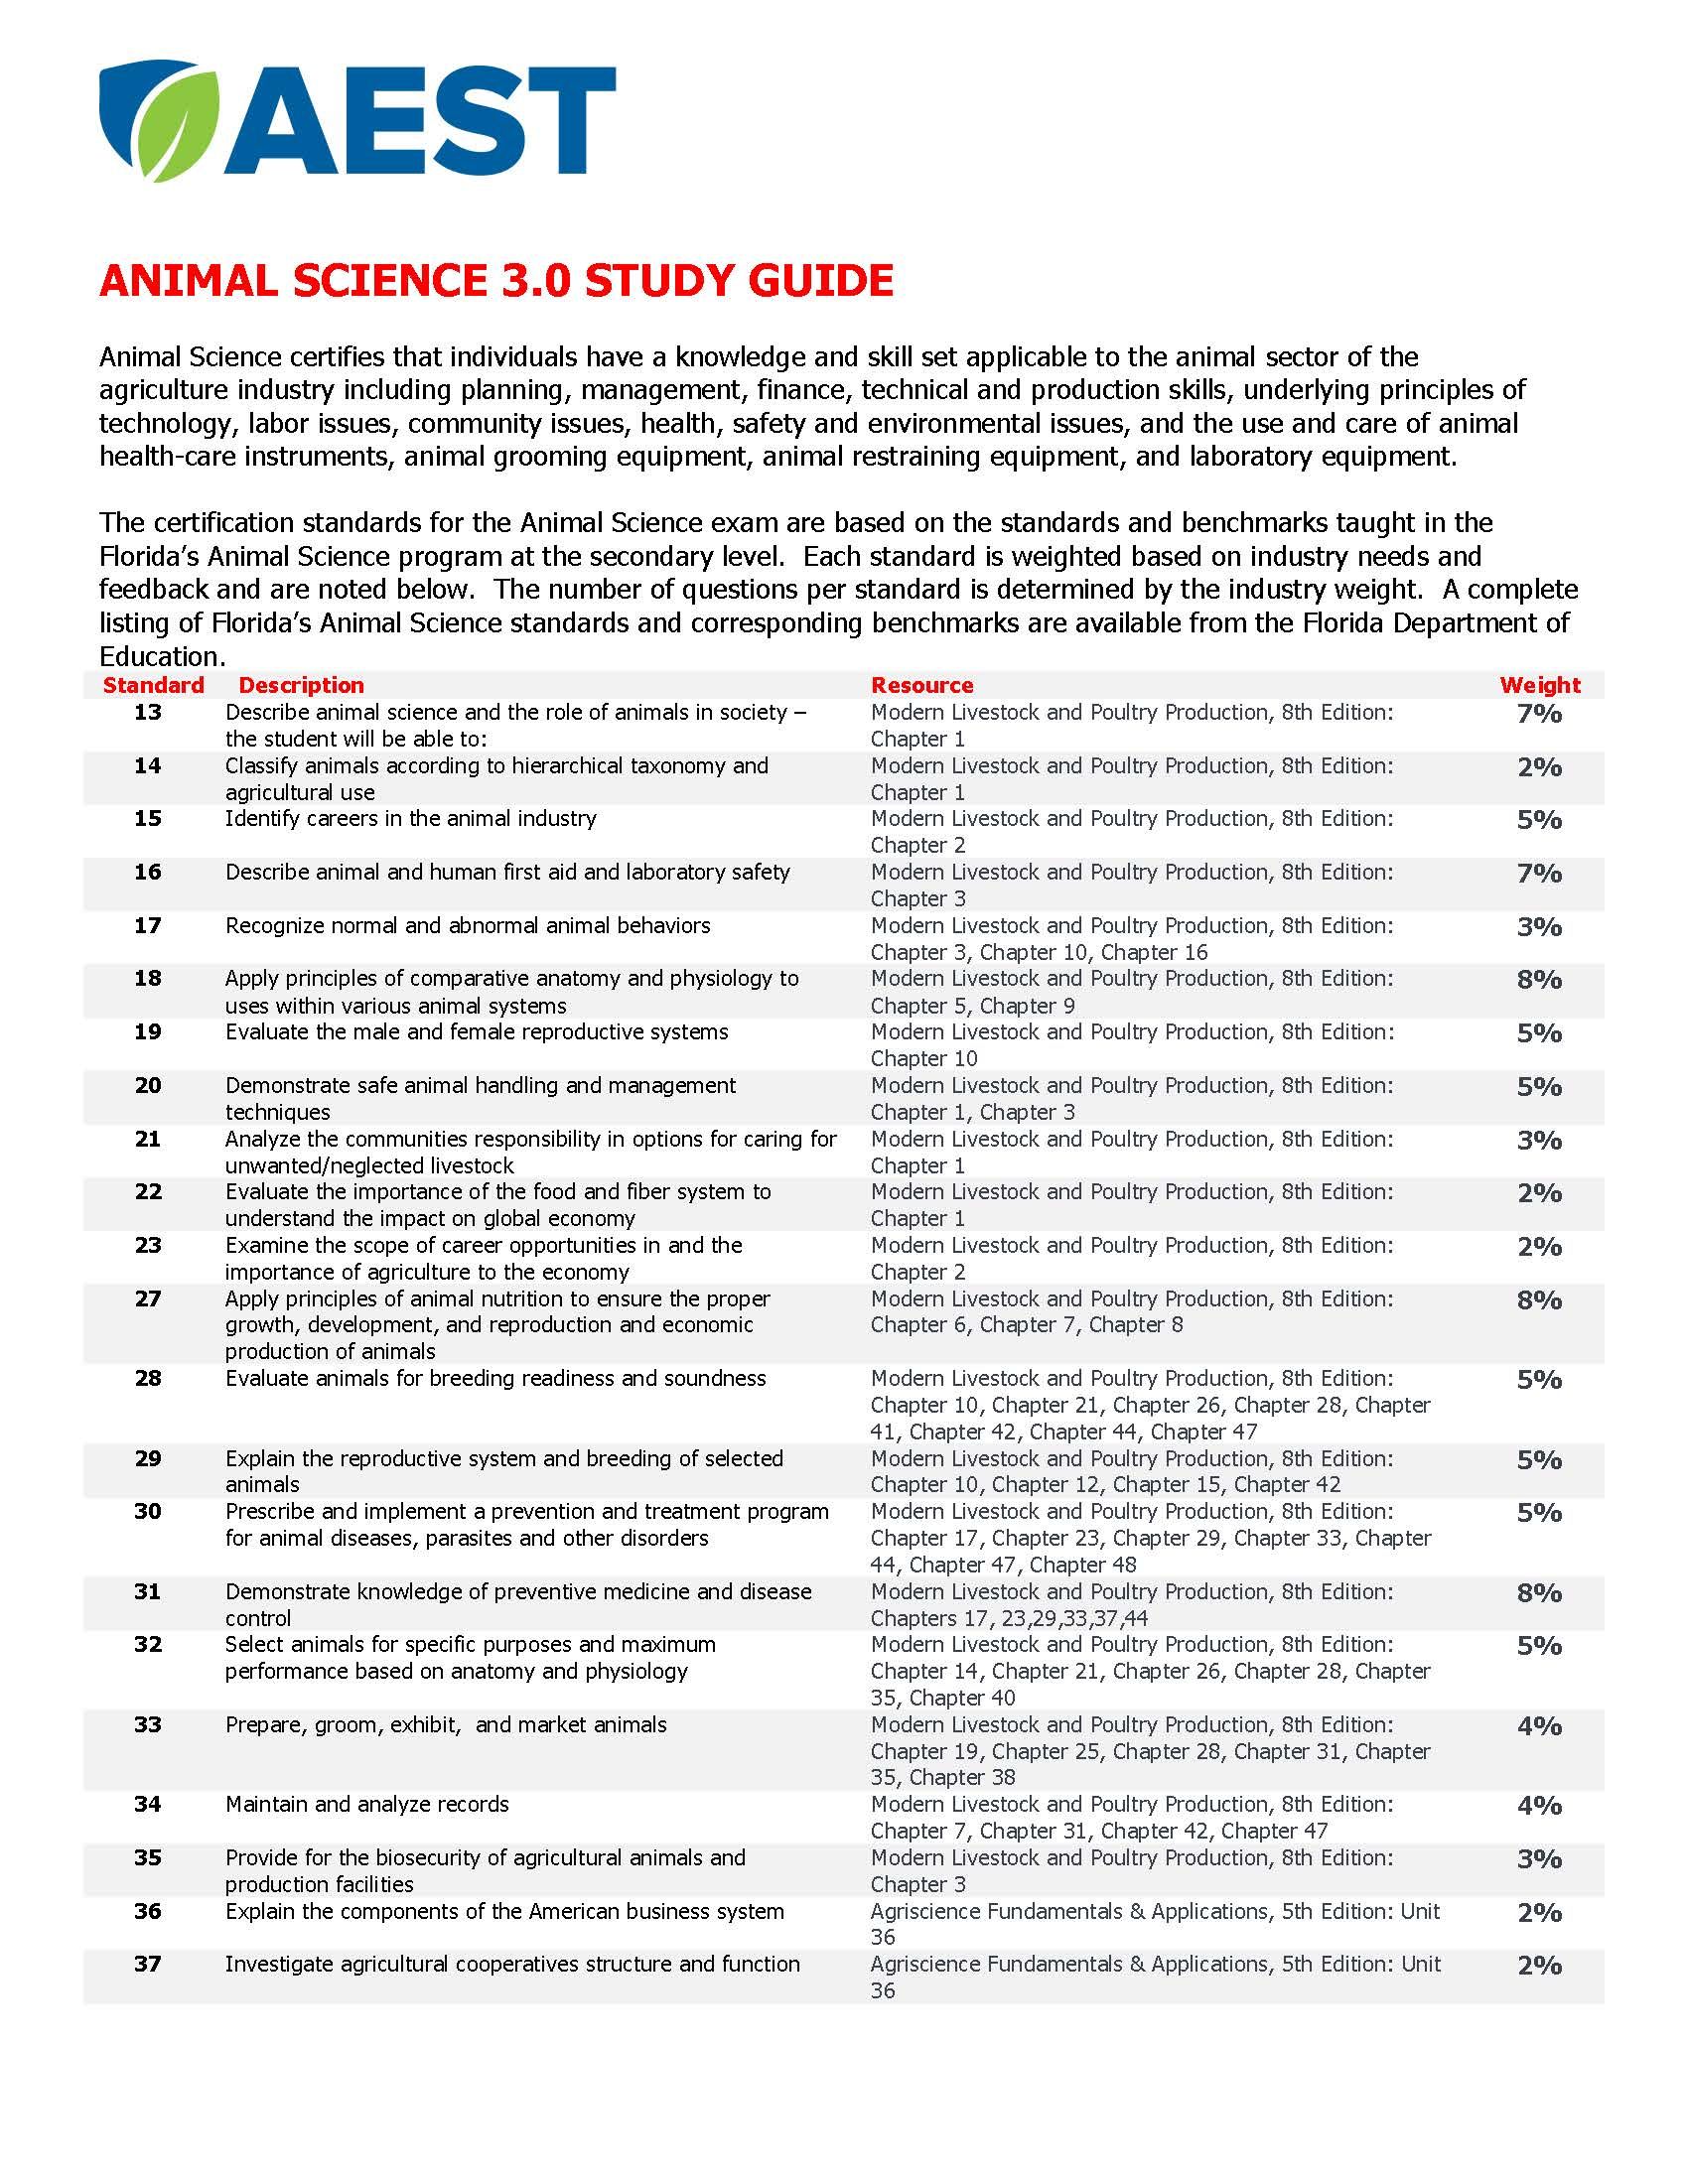 Locating Exam Guides through AEST: Exam review guides, like this sample for the Animal Science Specialist certification, can be found by going to the AEST homepage. Click the certifications tab and select the certification you wish to study. Scroll to the bottom of the page and select the “Exam Guide” button. 